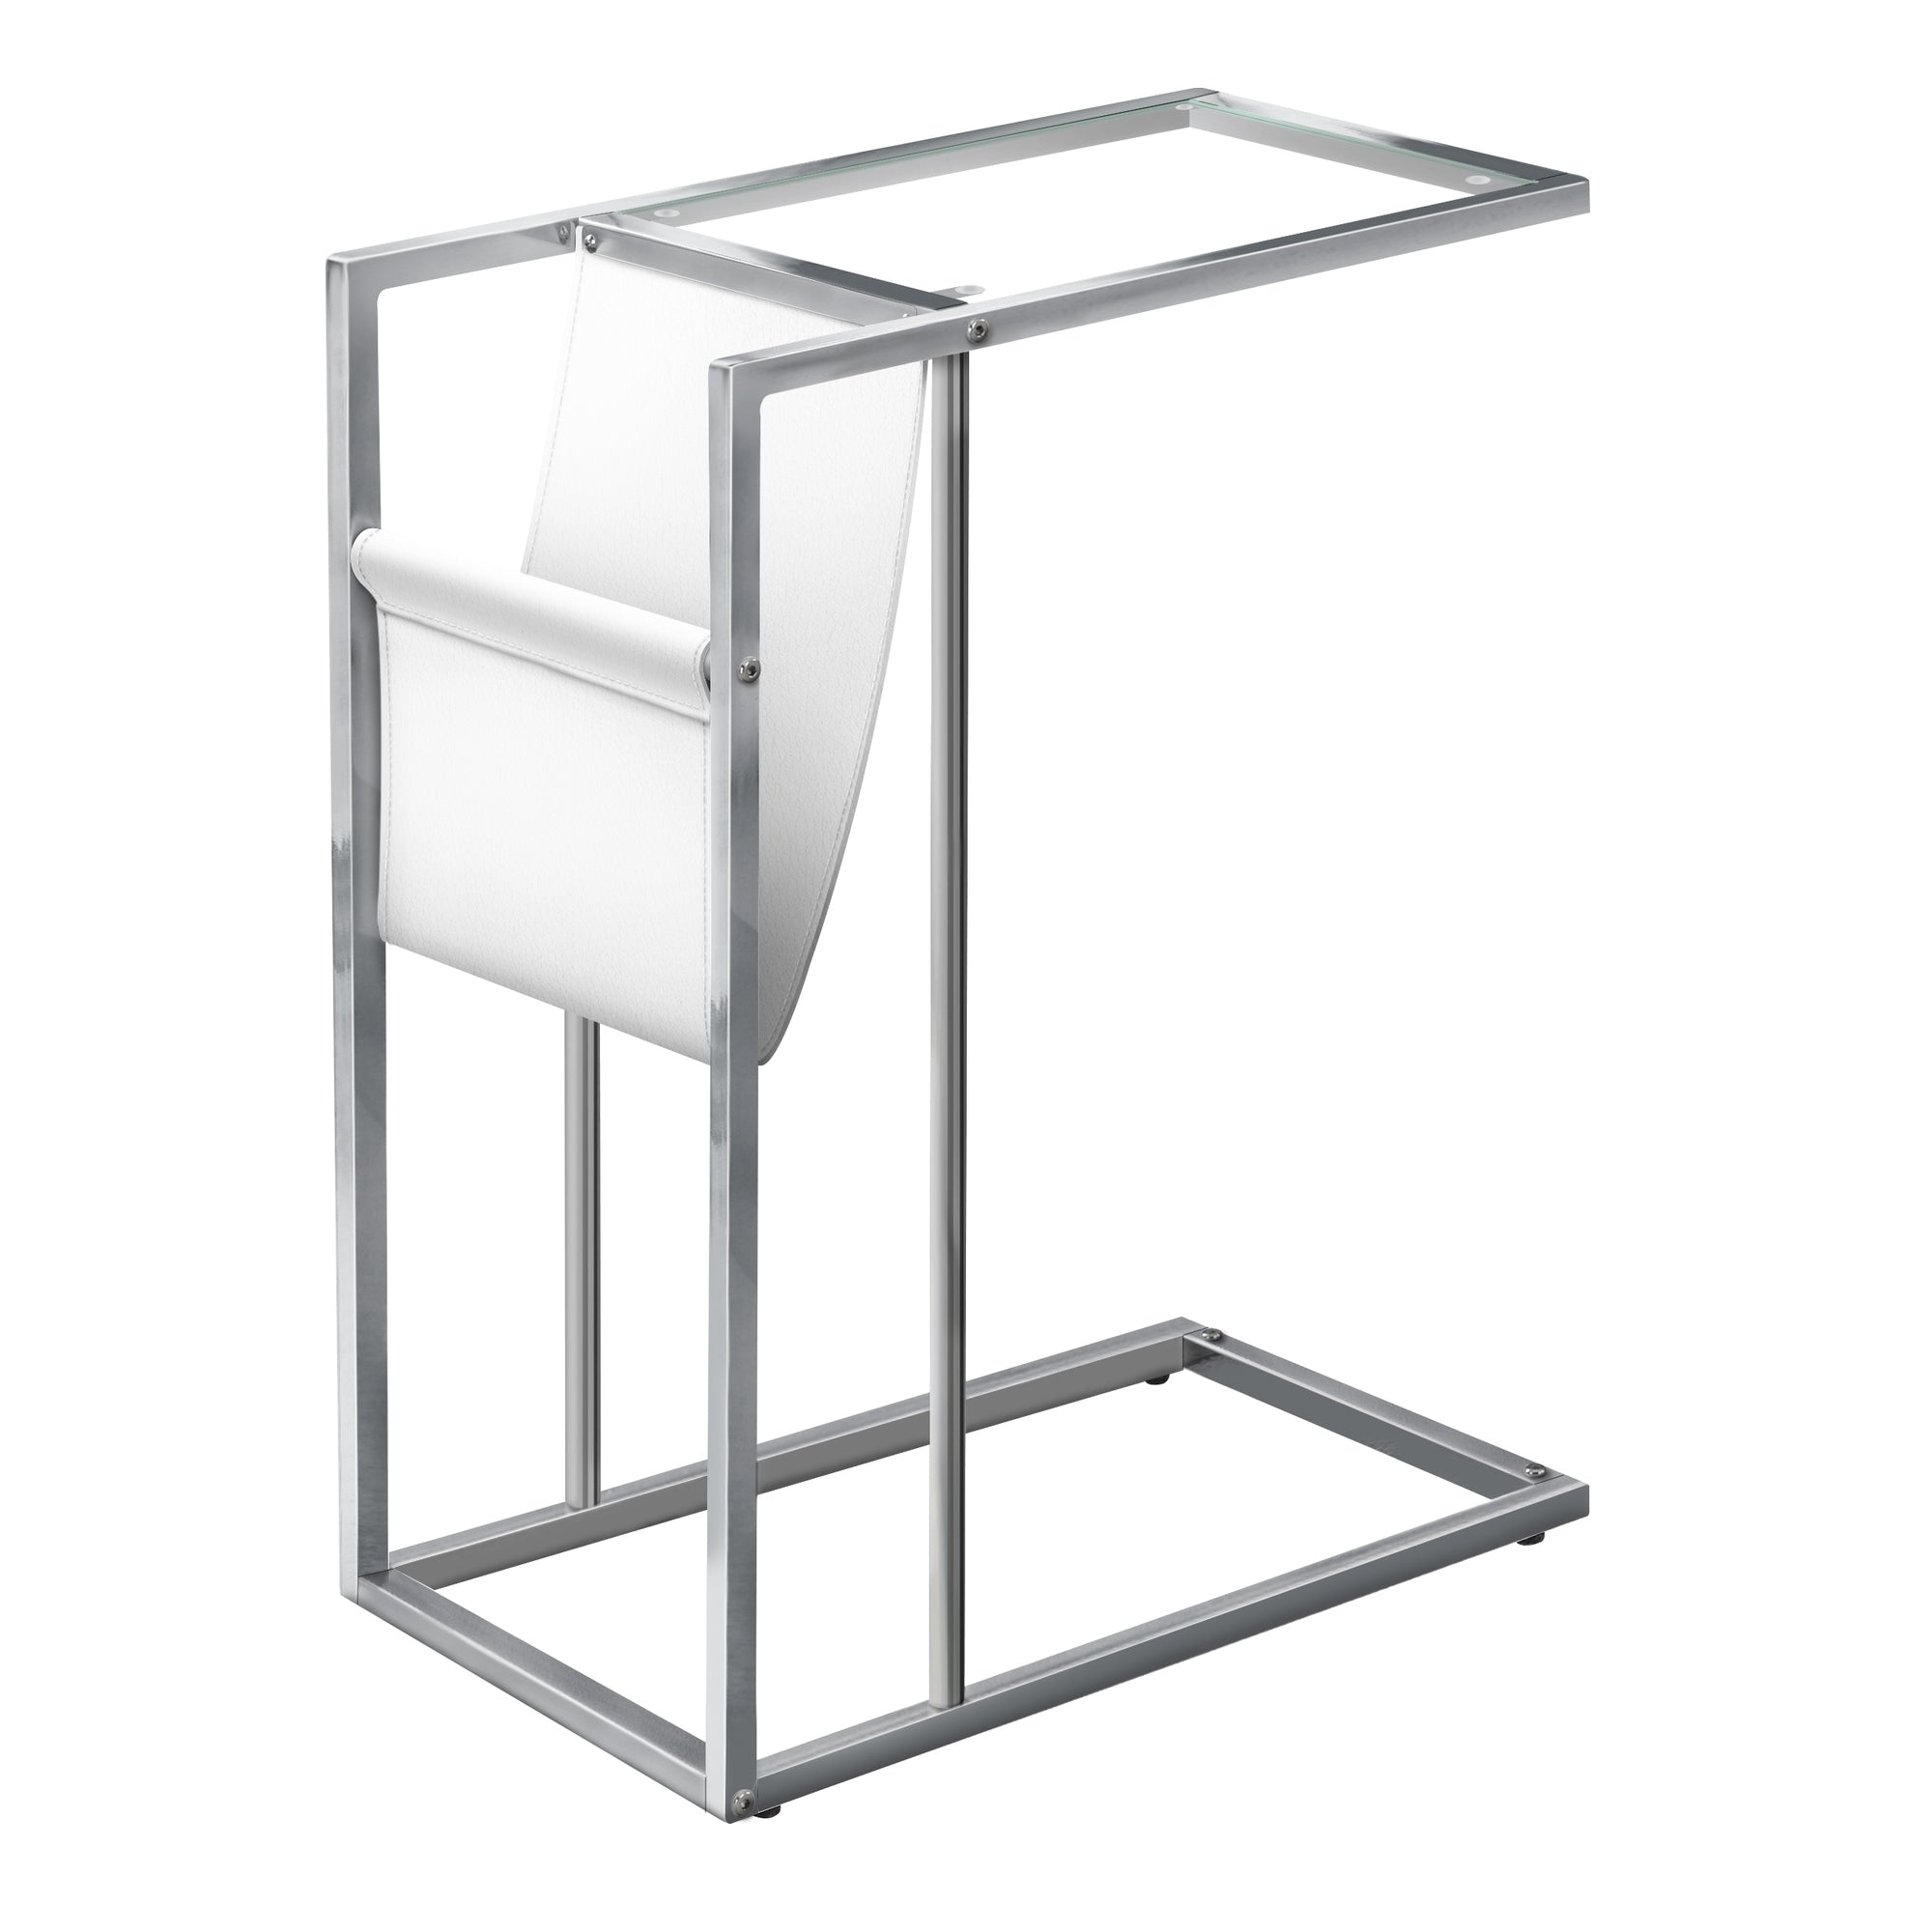 MN-873034    Accent Table, C-Shaped, End, Side, Snack, Living Room, Bedroom, Magazine Storage, Metal Legs, Leather Look, Tempered Glass, Chrome, Clear, Contemporary, Modern